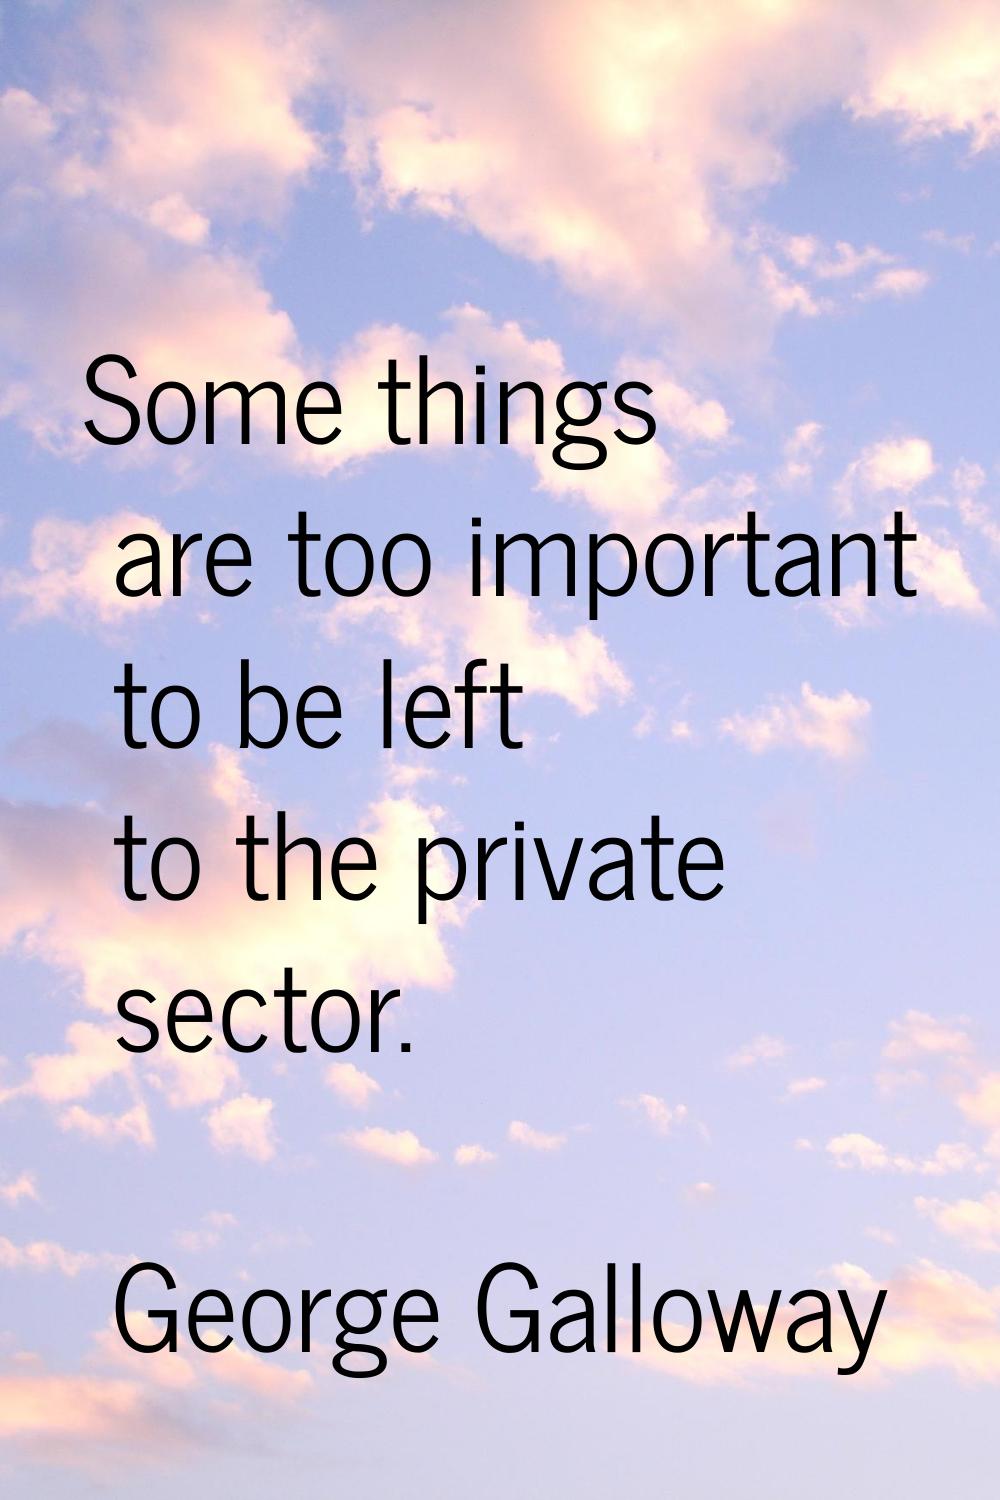 Some things are too important to be left to the private sector.